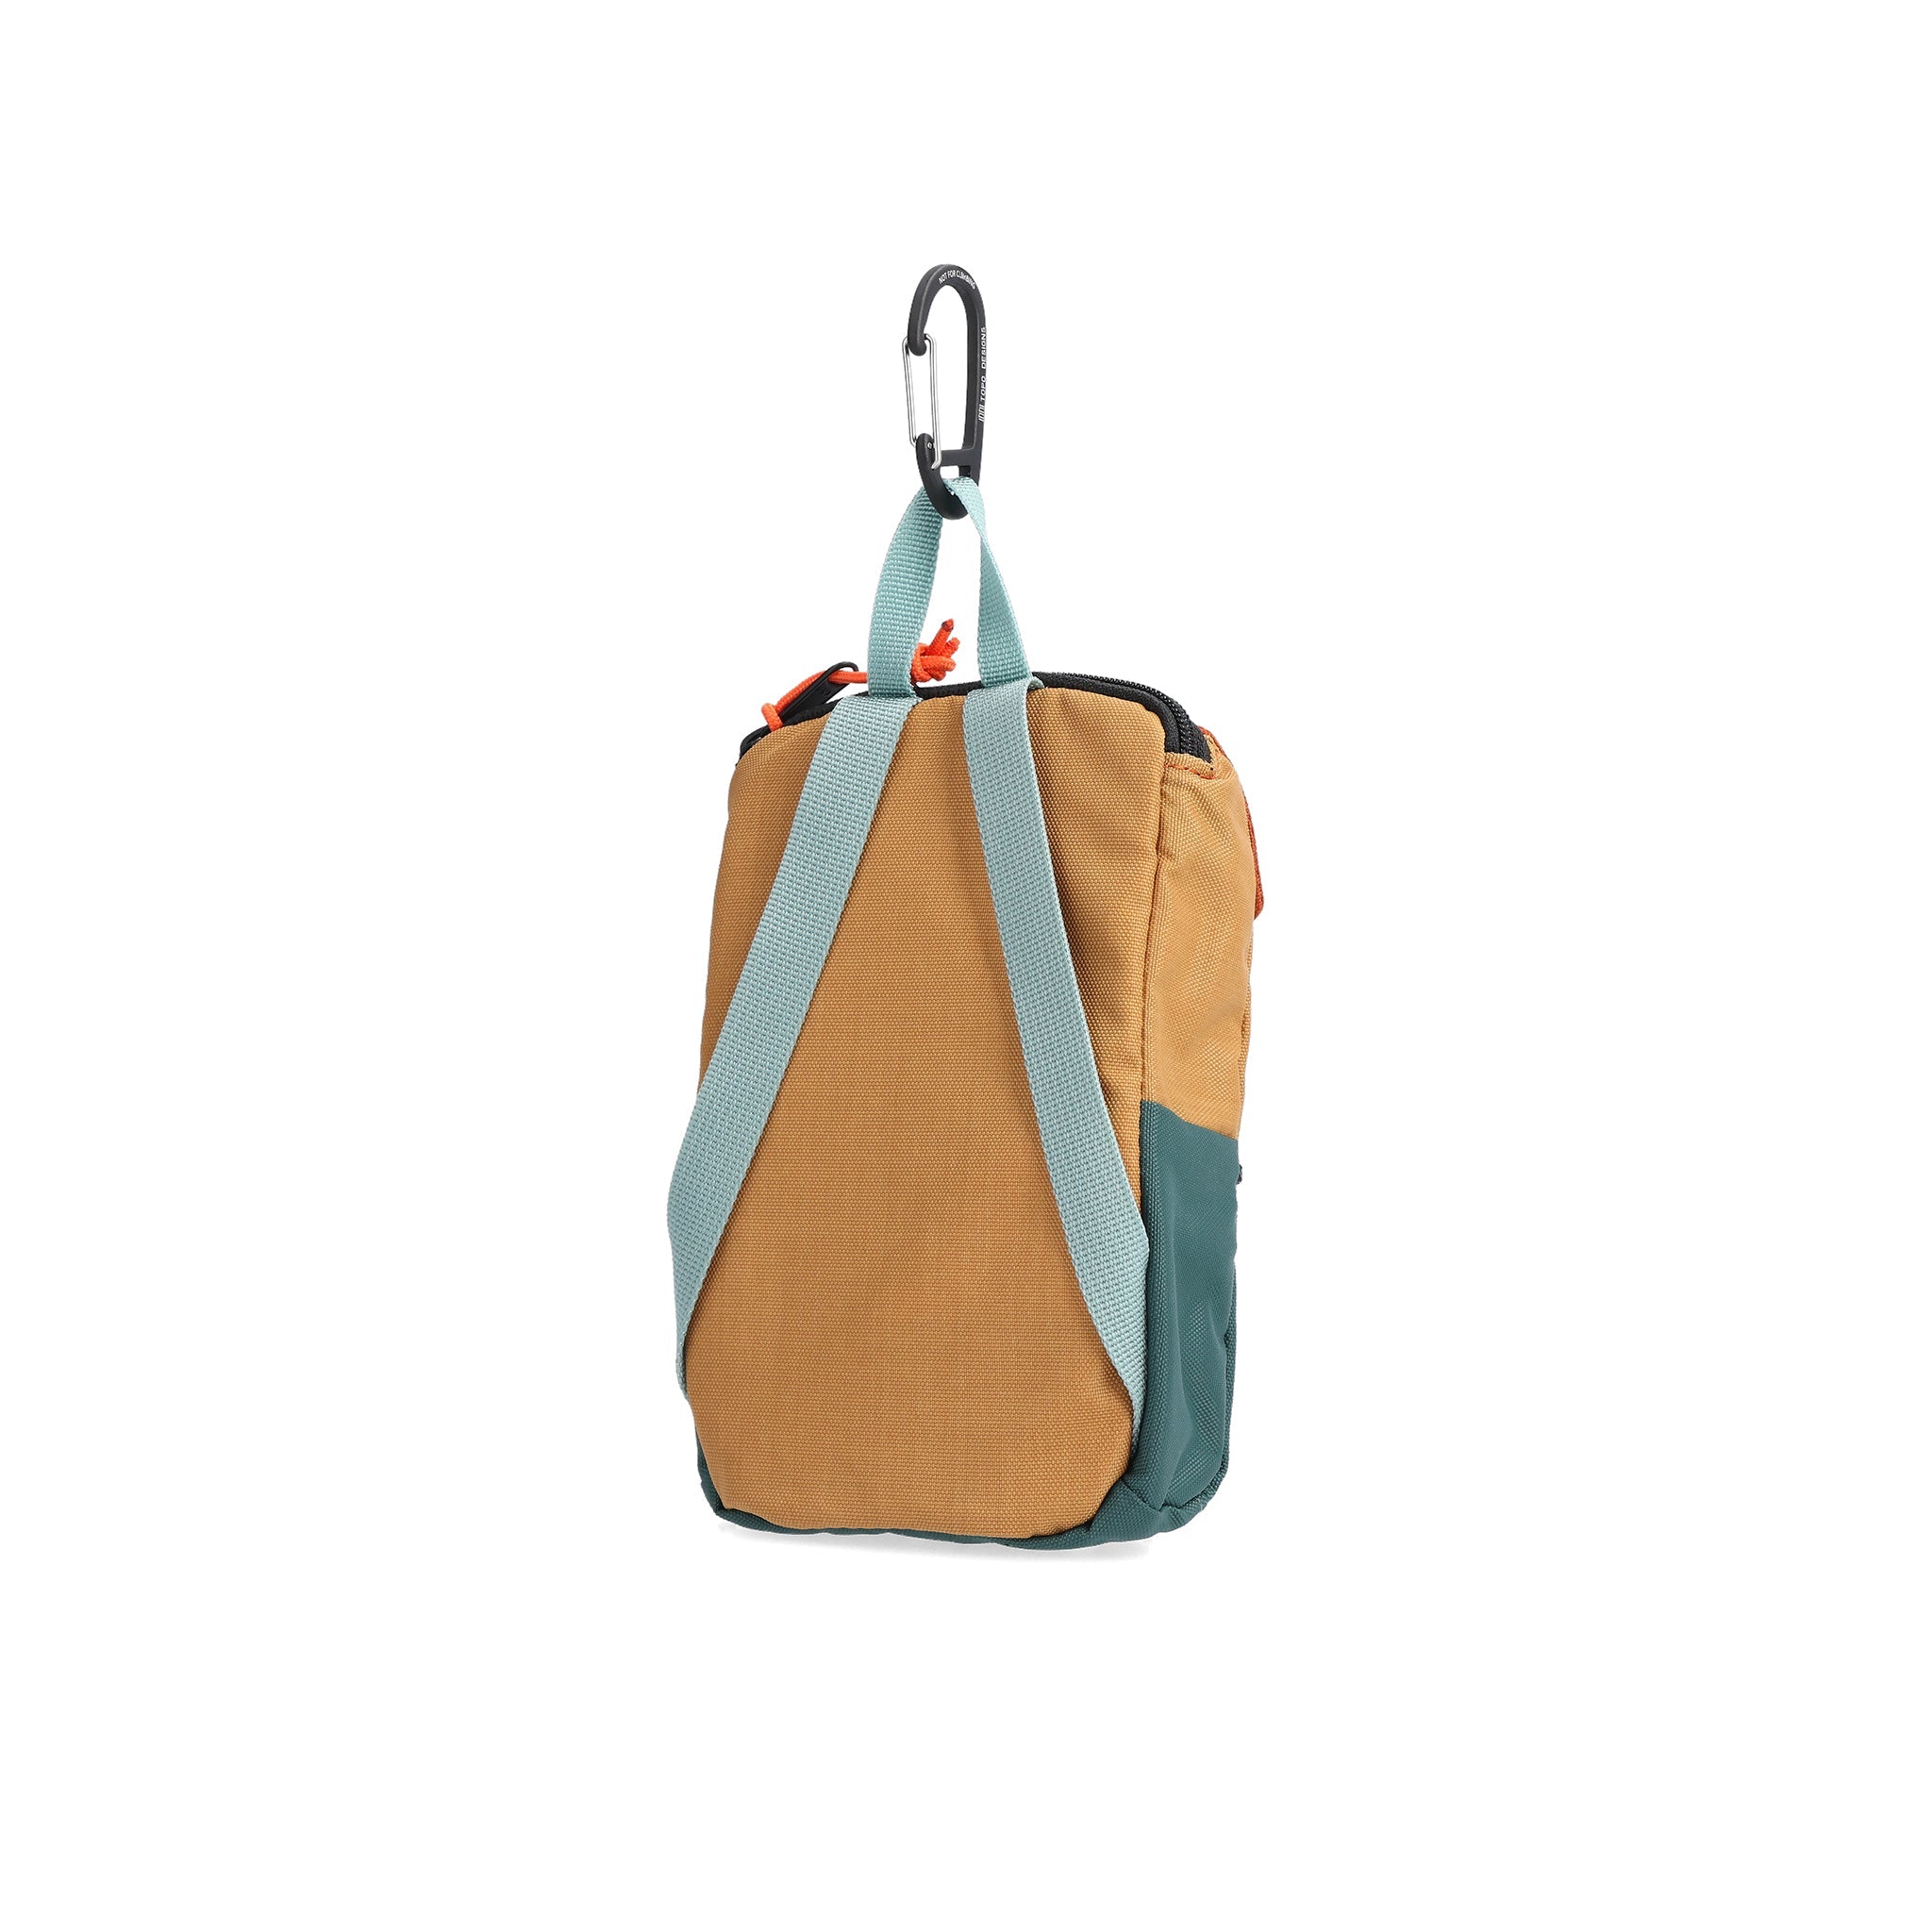 Back View of Topo Designs Rover Pack Micro in "Khaki / Forest"